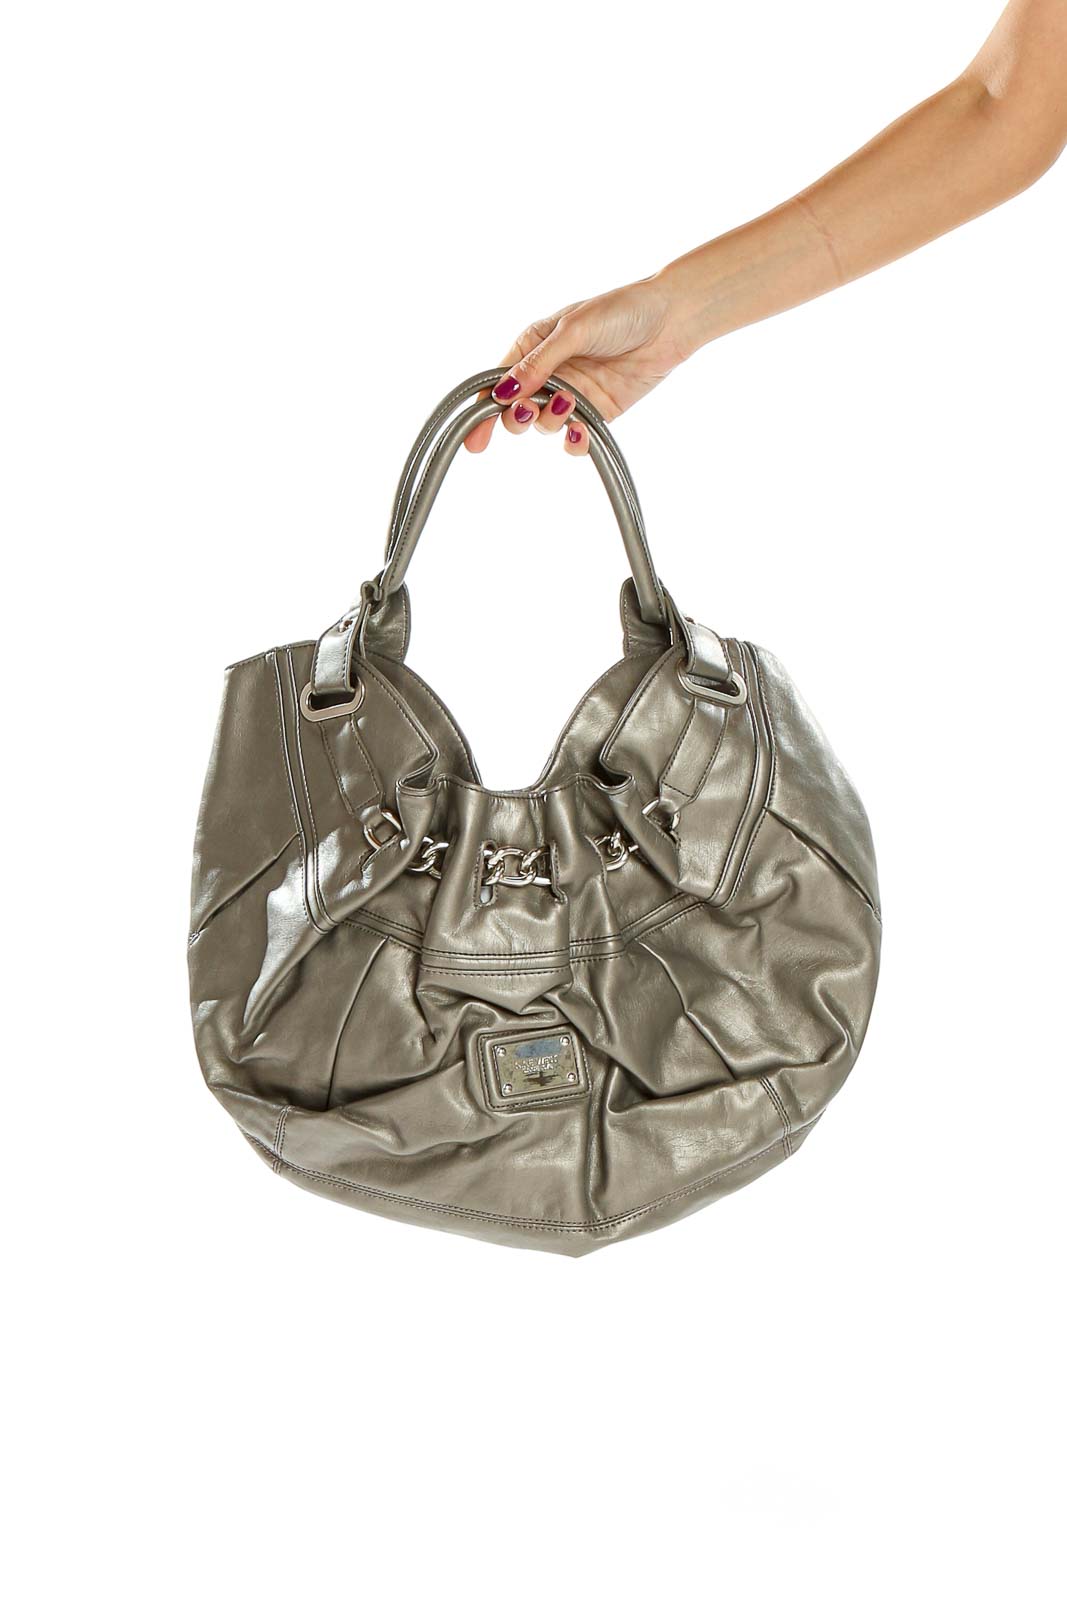 Gray Purse Front